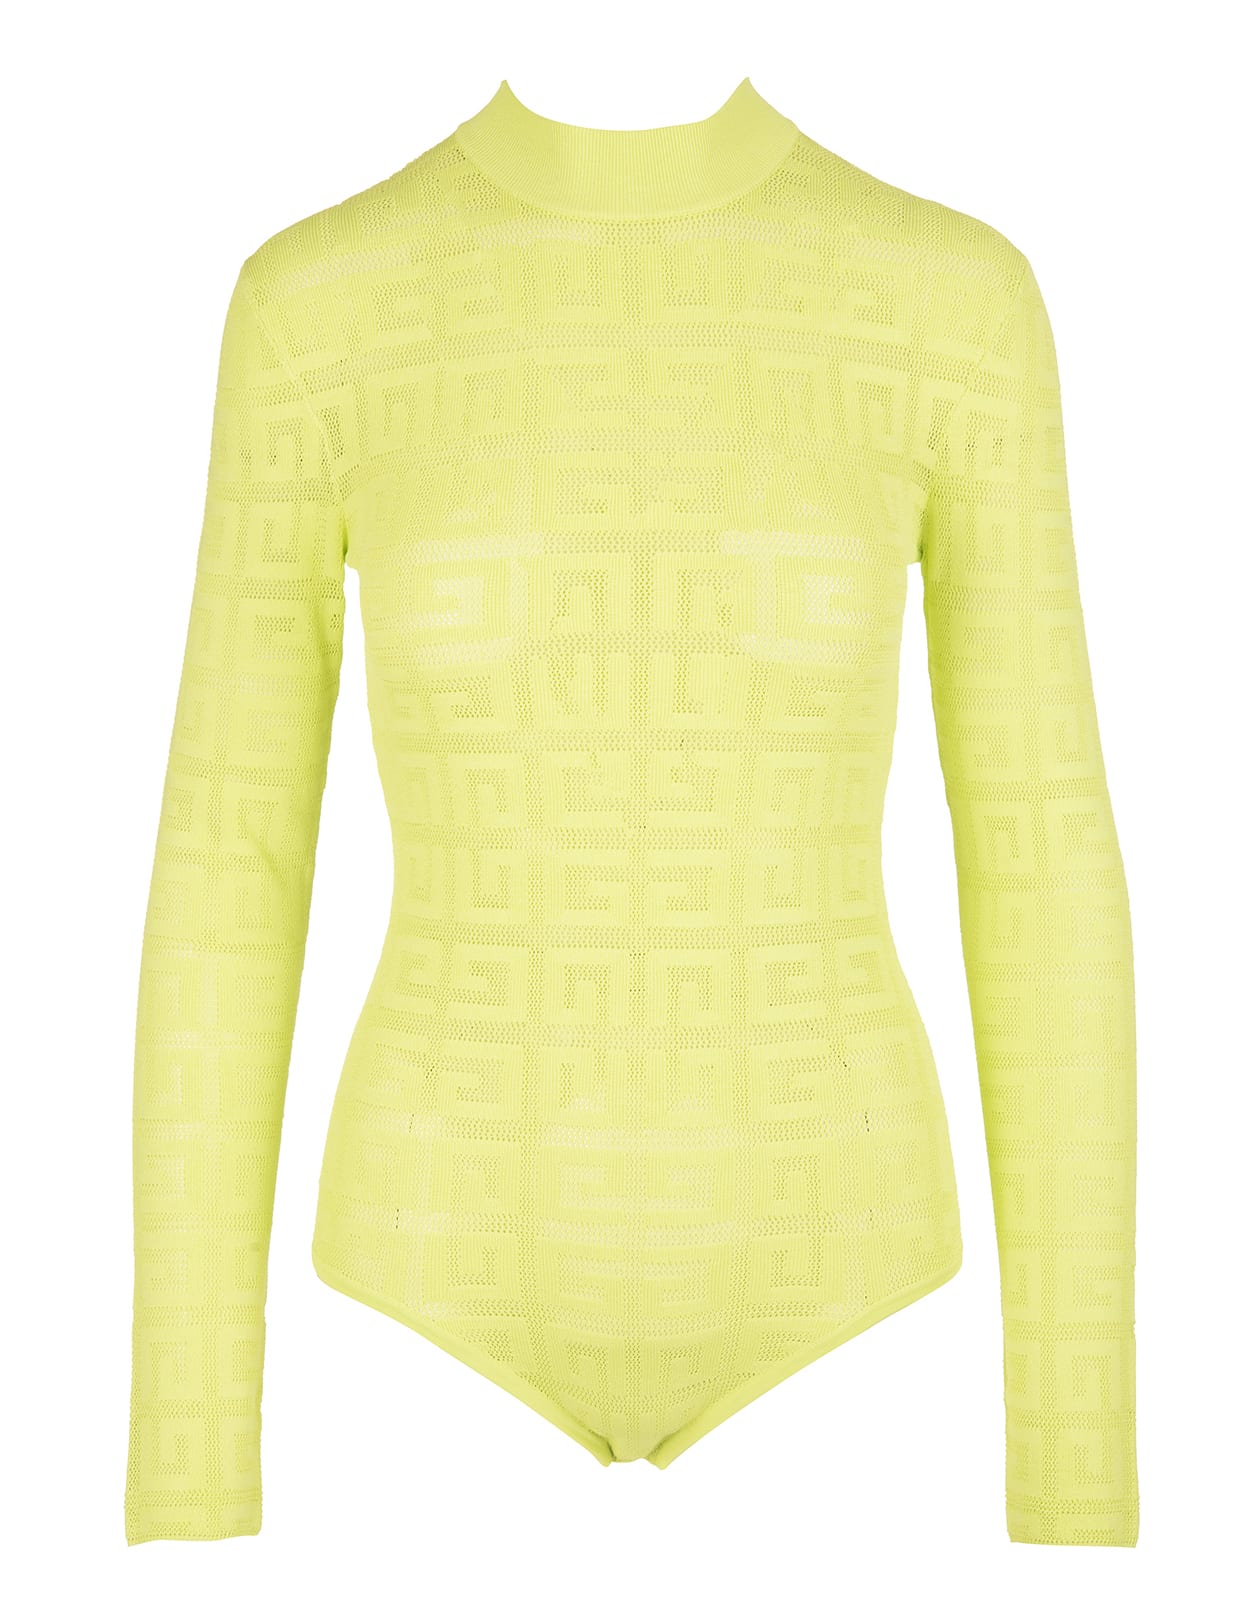 Fluo Yellow Body Top With Givenchy 4g Monogram Motif